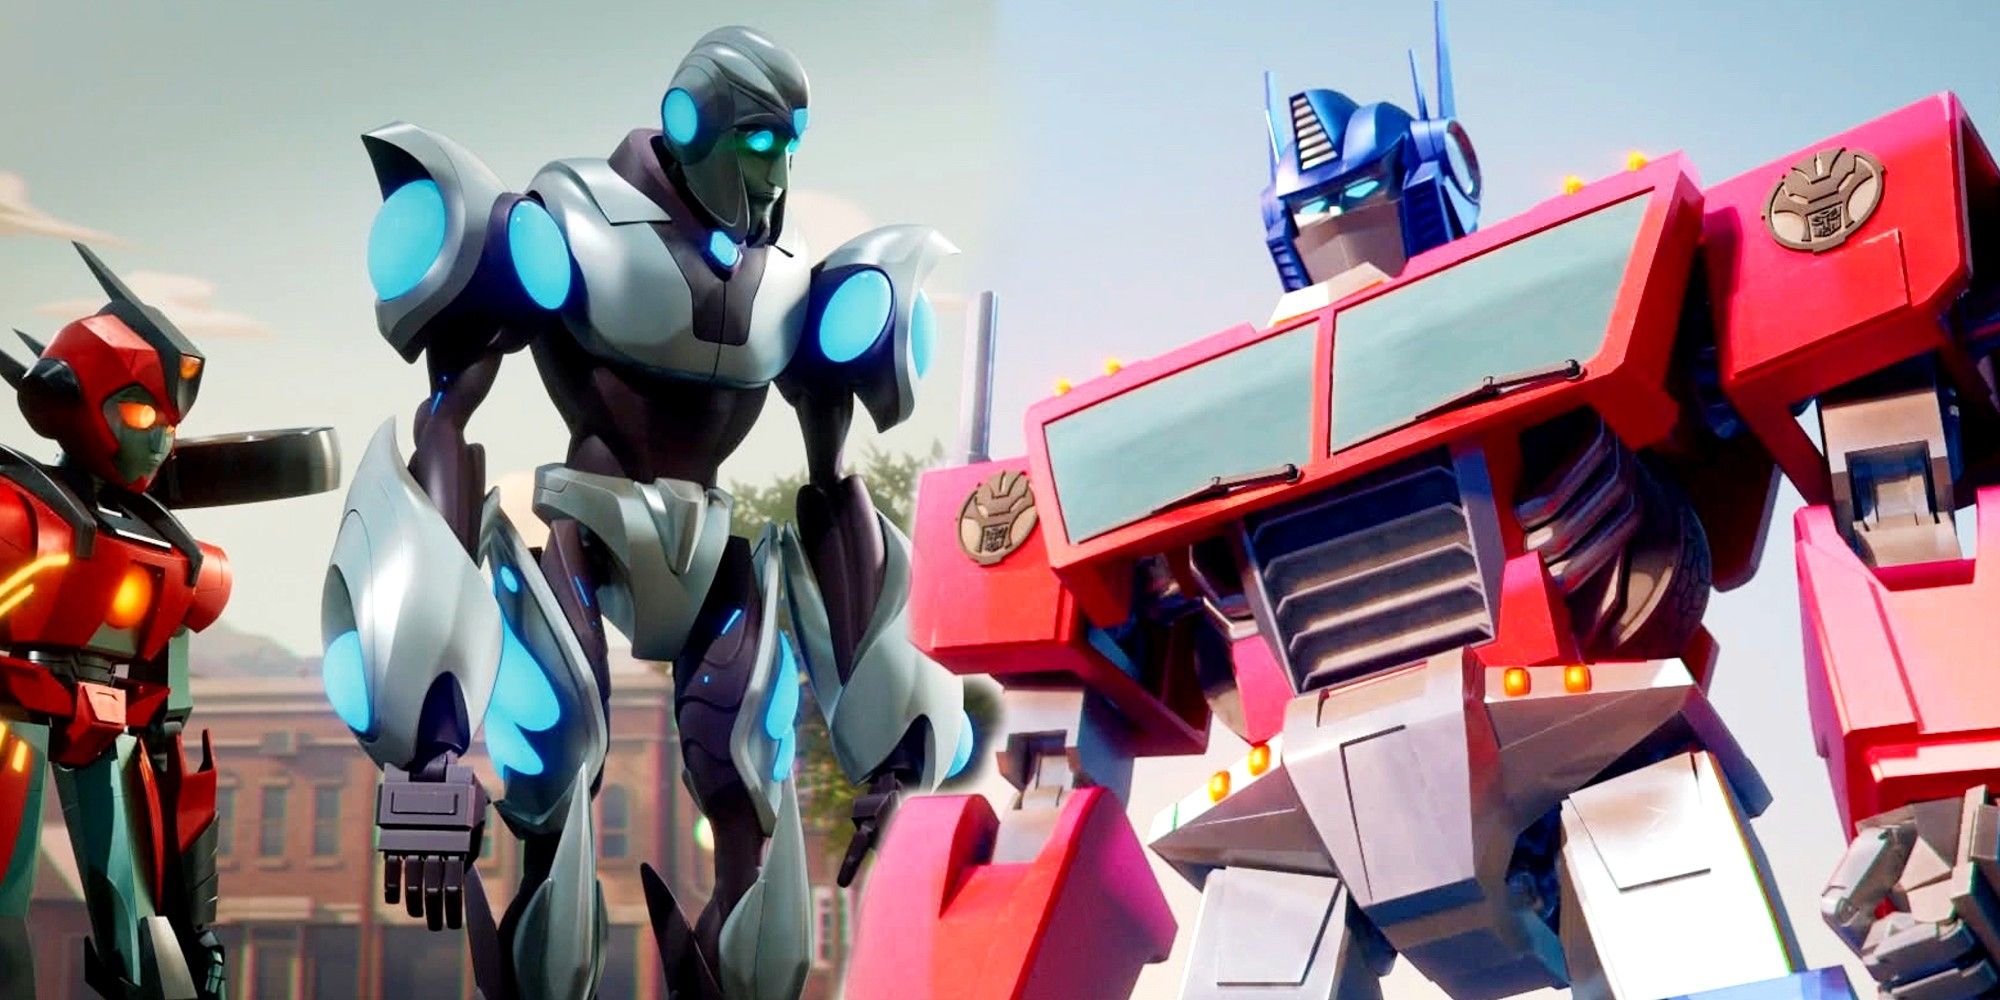 New Transformers Animated Show Trailer Reveals First Look & Title